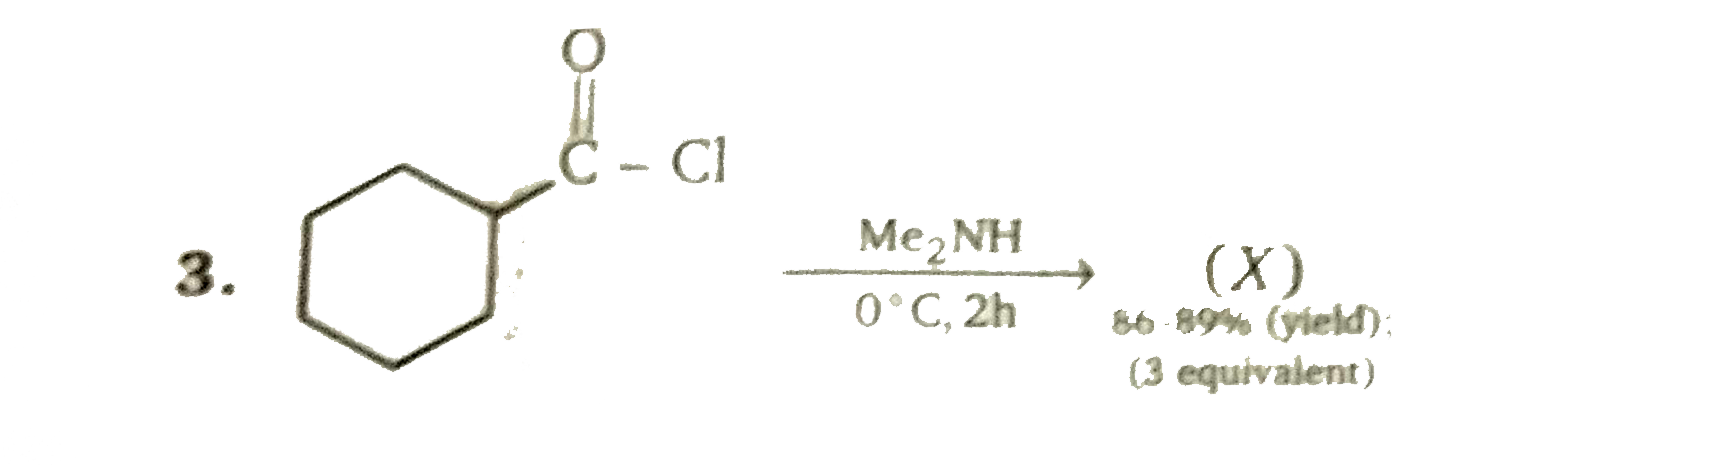 Product (X) of the reaction is: